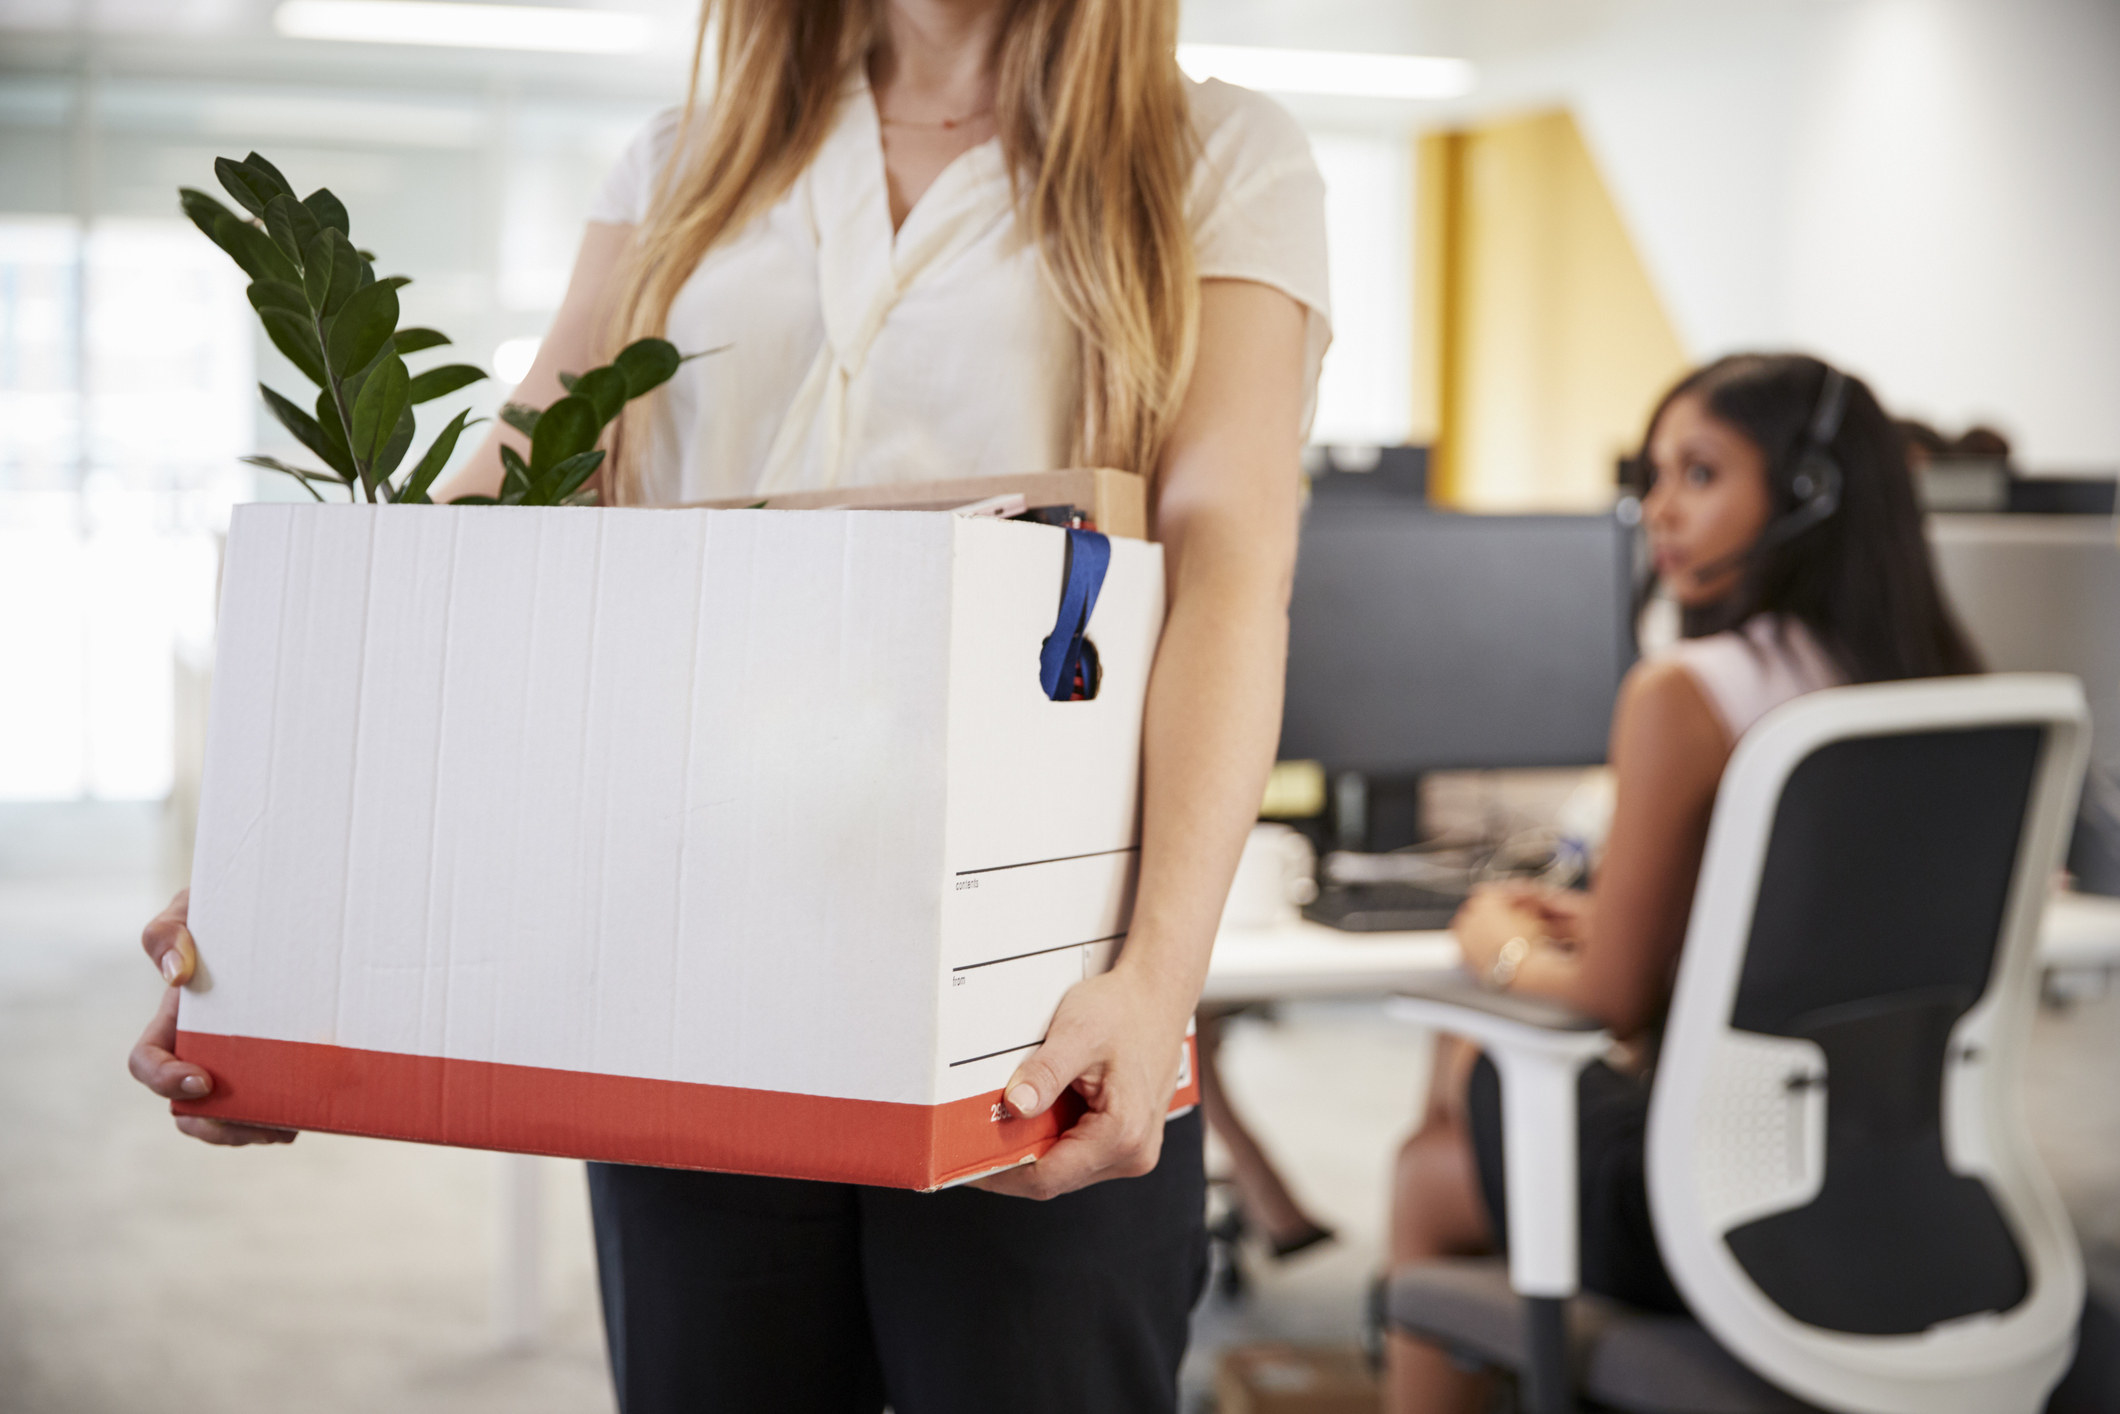 Woman holding a box of office supplies with a plant, indicating she might be leaving her job or relocating desks